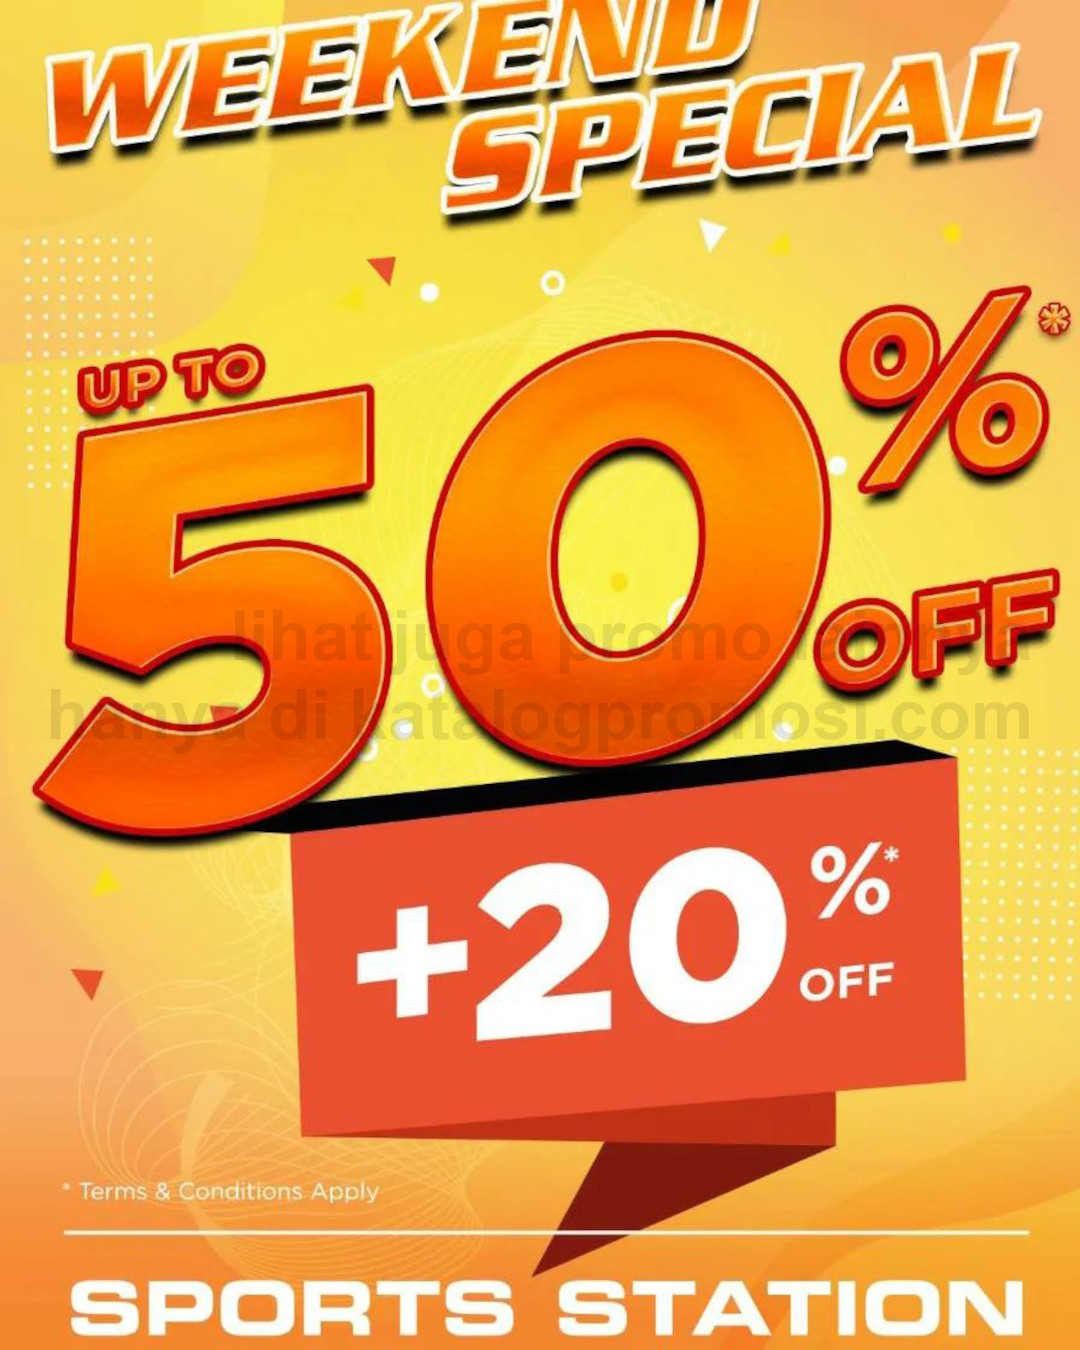 Promo SPORTS STATION LONG WEEKEND SALE - Discount Up To 50% Off + 20% Off*